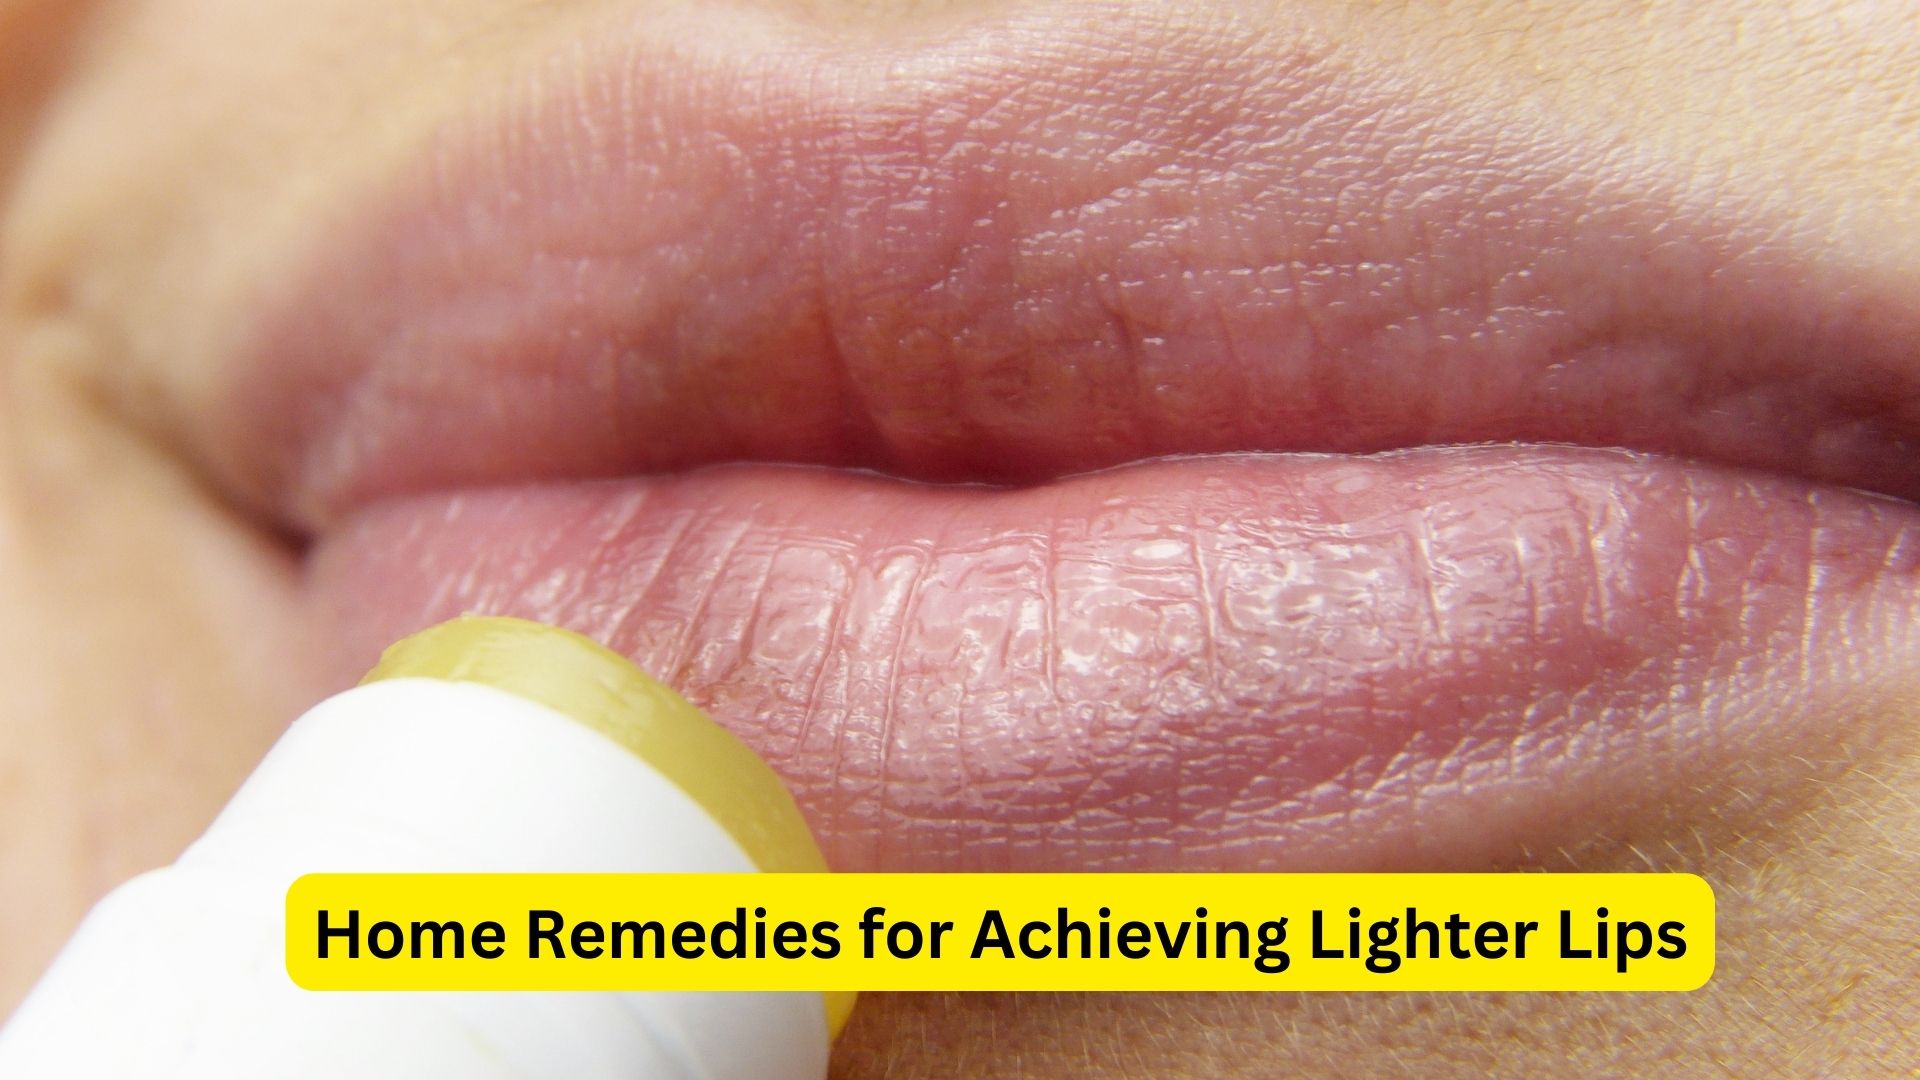 Home Remedies for Achieving Lighter Lips